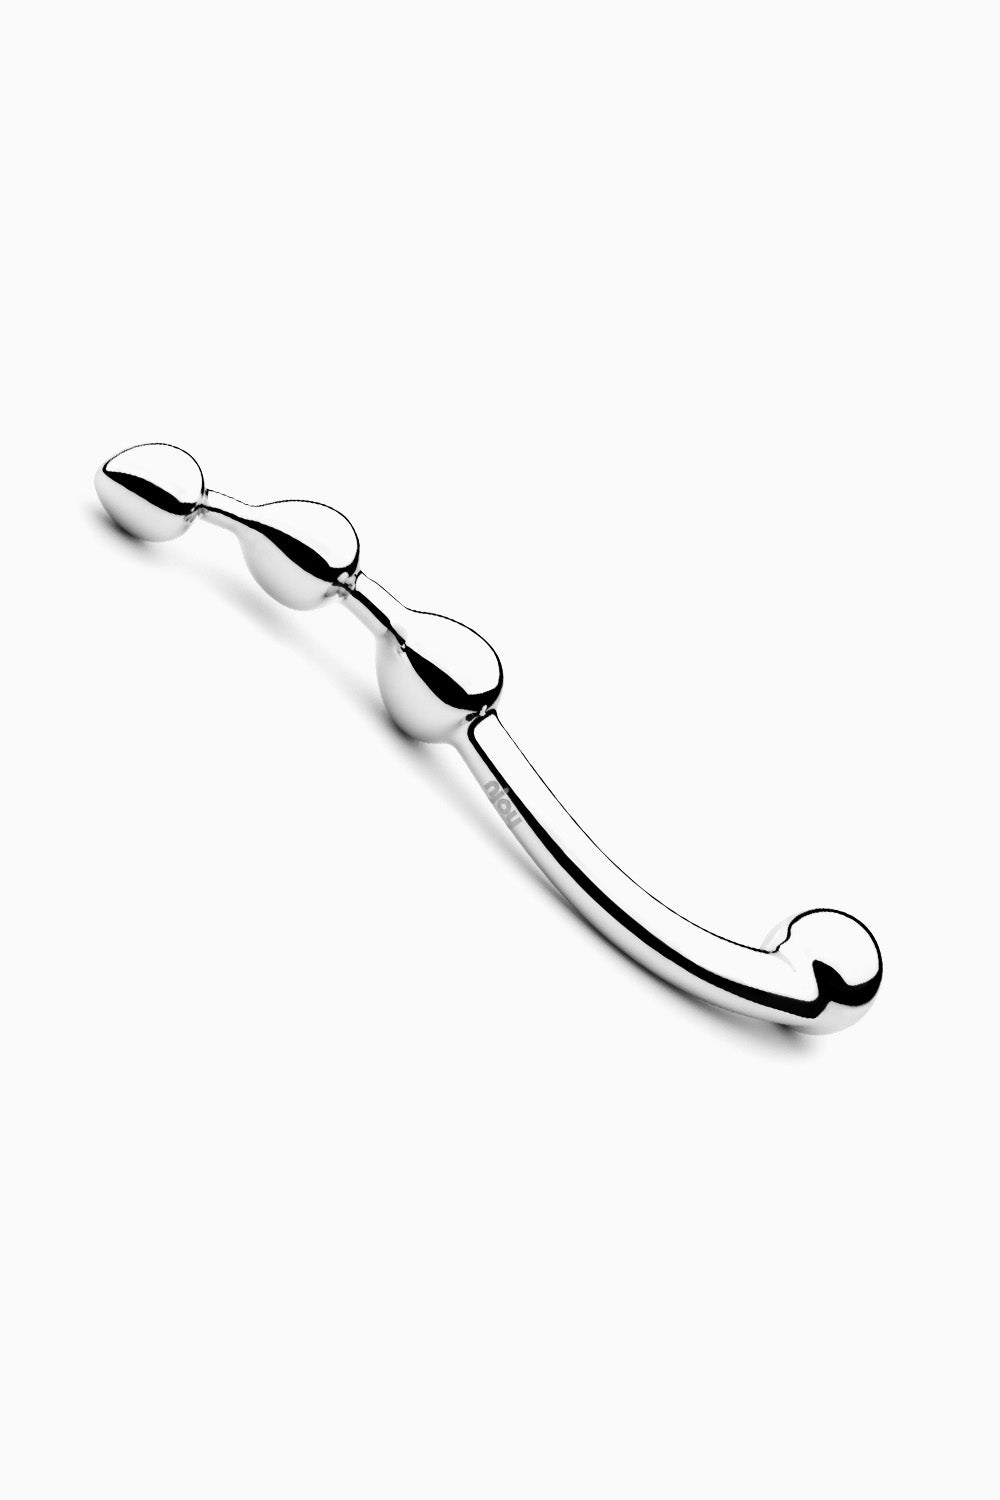 NJOY Fun Wand Stainless Steel Dildo, 8 Inches